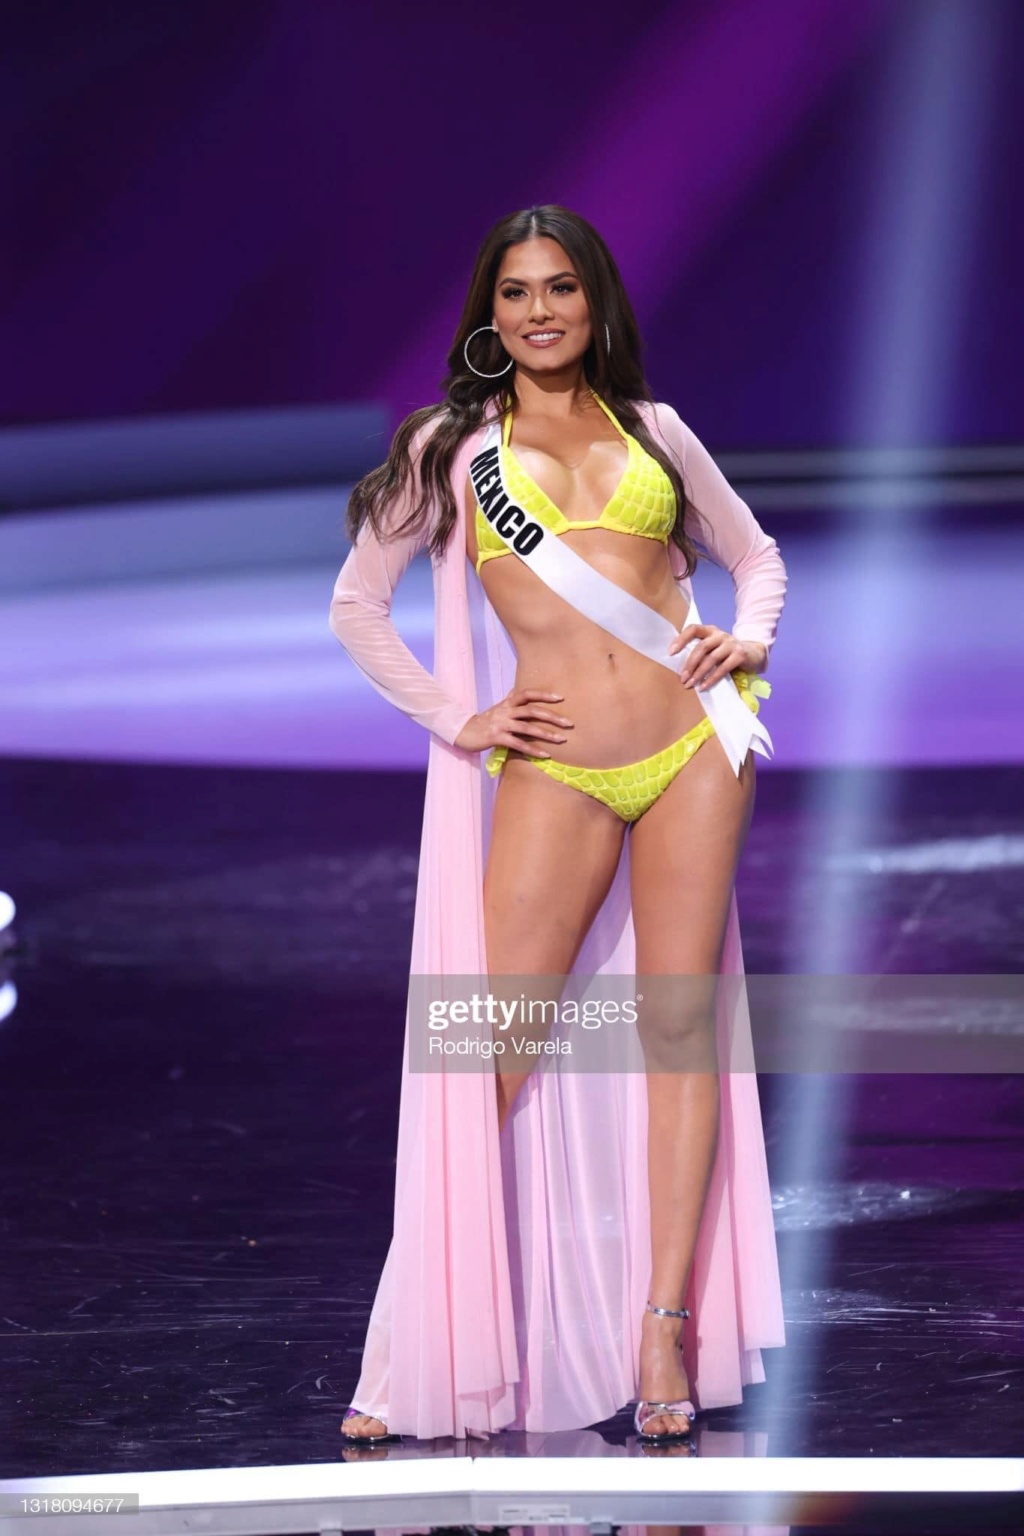 The Official Thread Of Miss Universe 2020 - Andrea Meza of Mexico  18758810